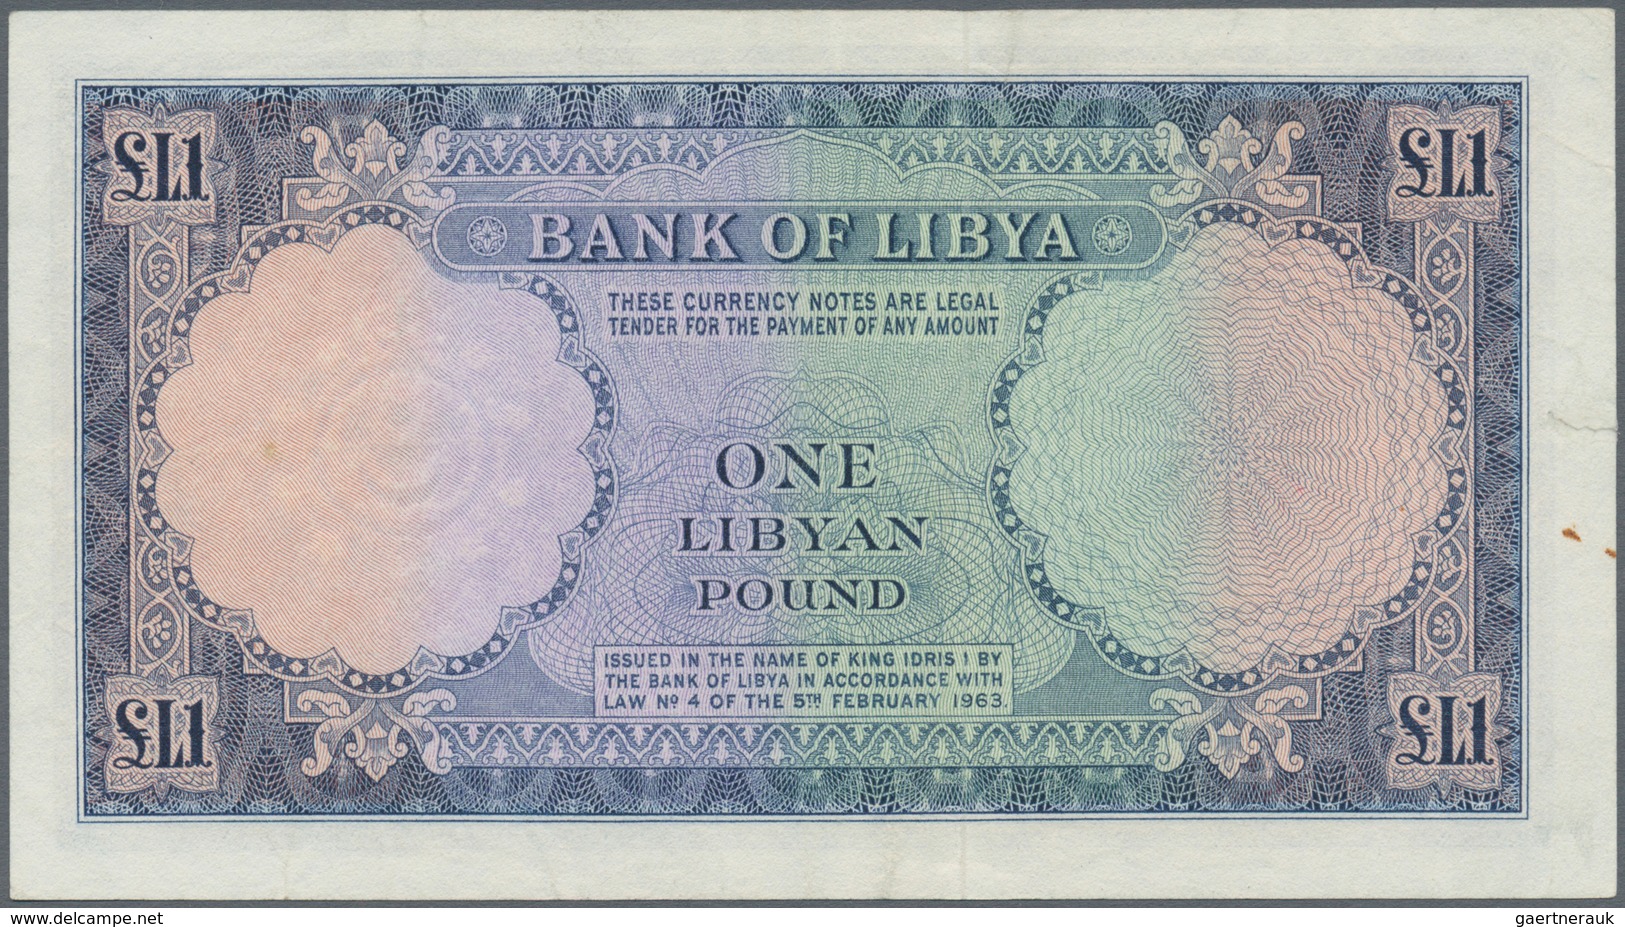 Libya / Libyen: 1 Pound ND P. 25, Lightly Used With Folds, Seems To Be Pressed But Still With Strong - Libye